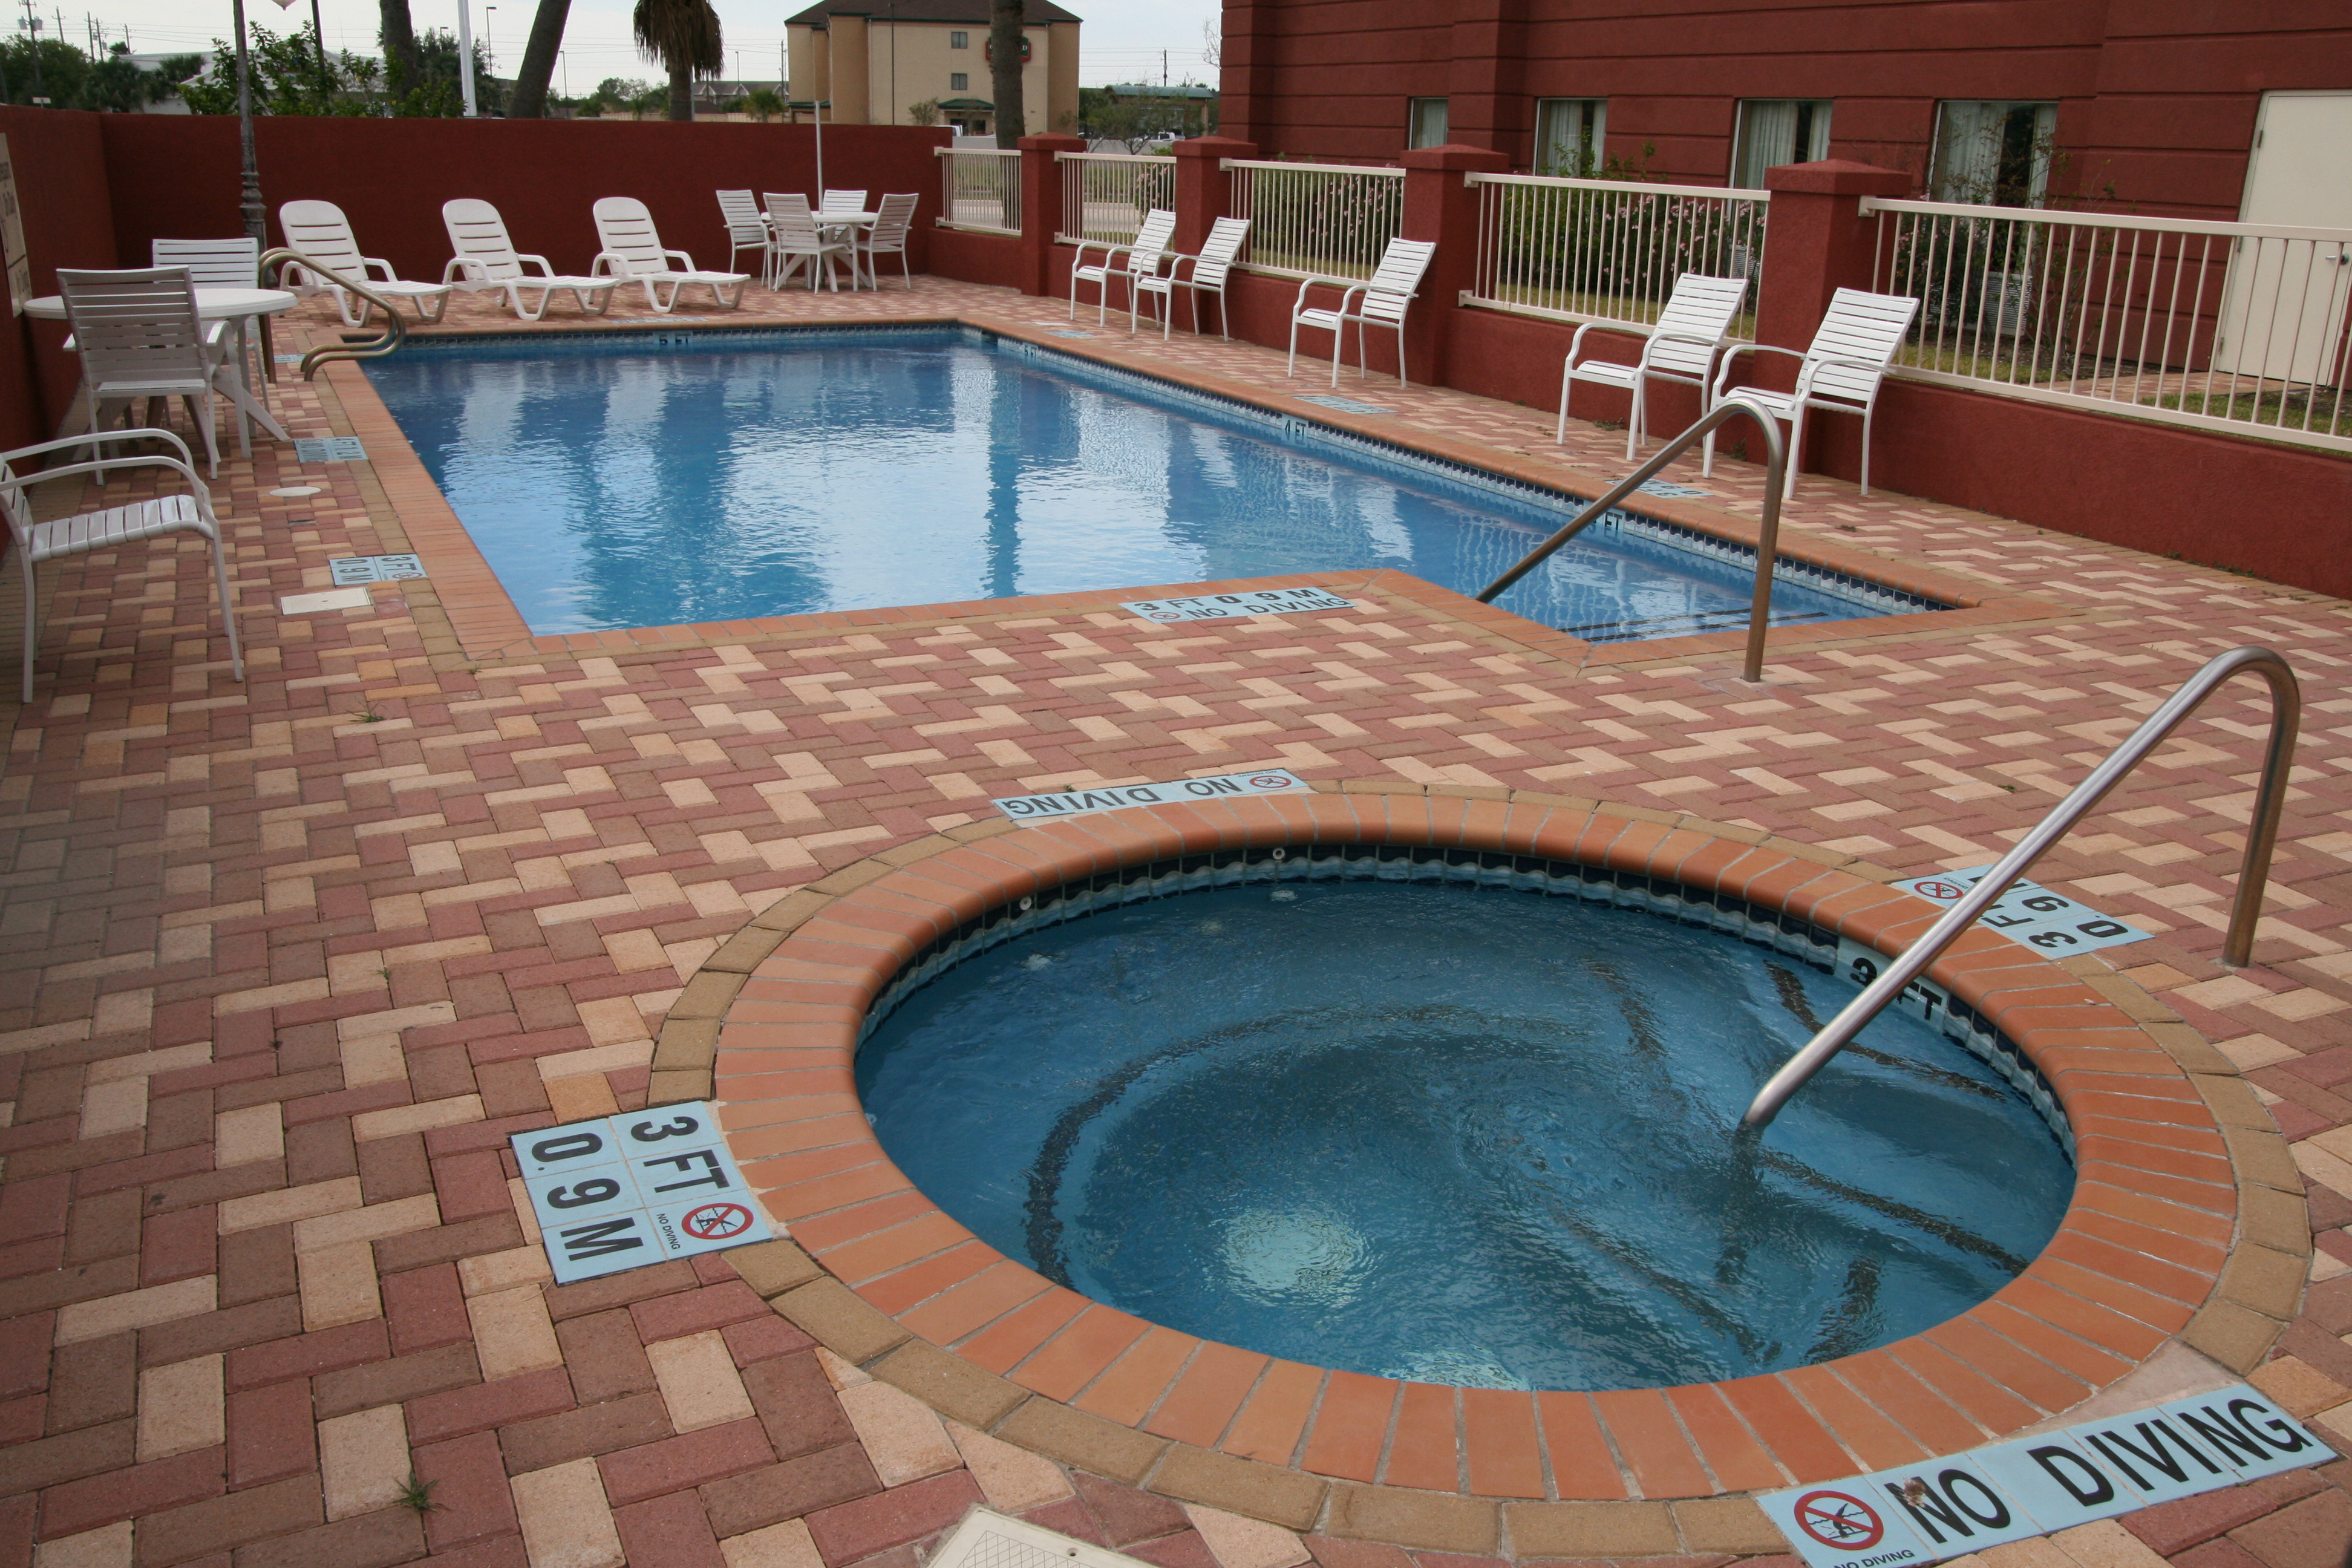 Outdoor Pool and Whirlpool